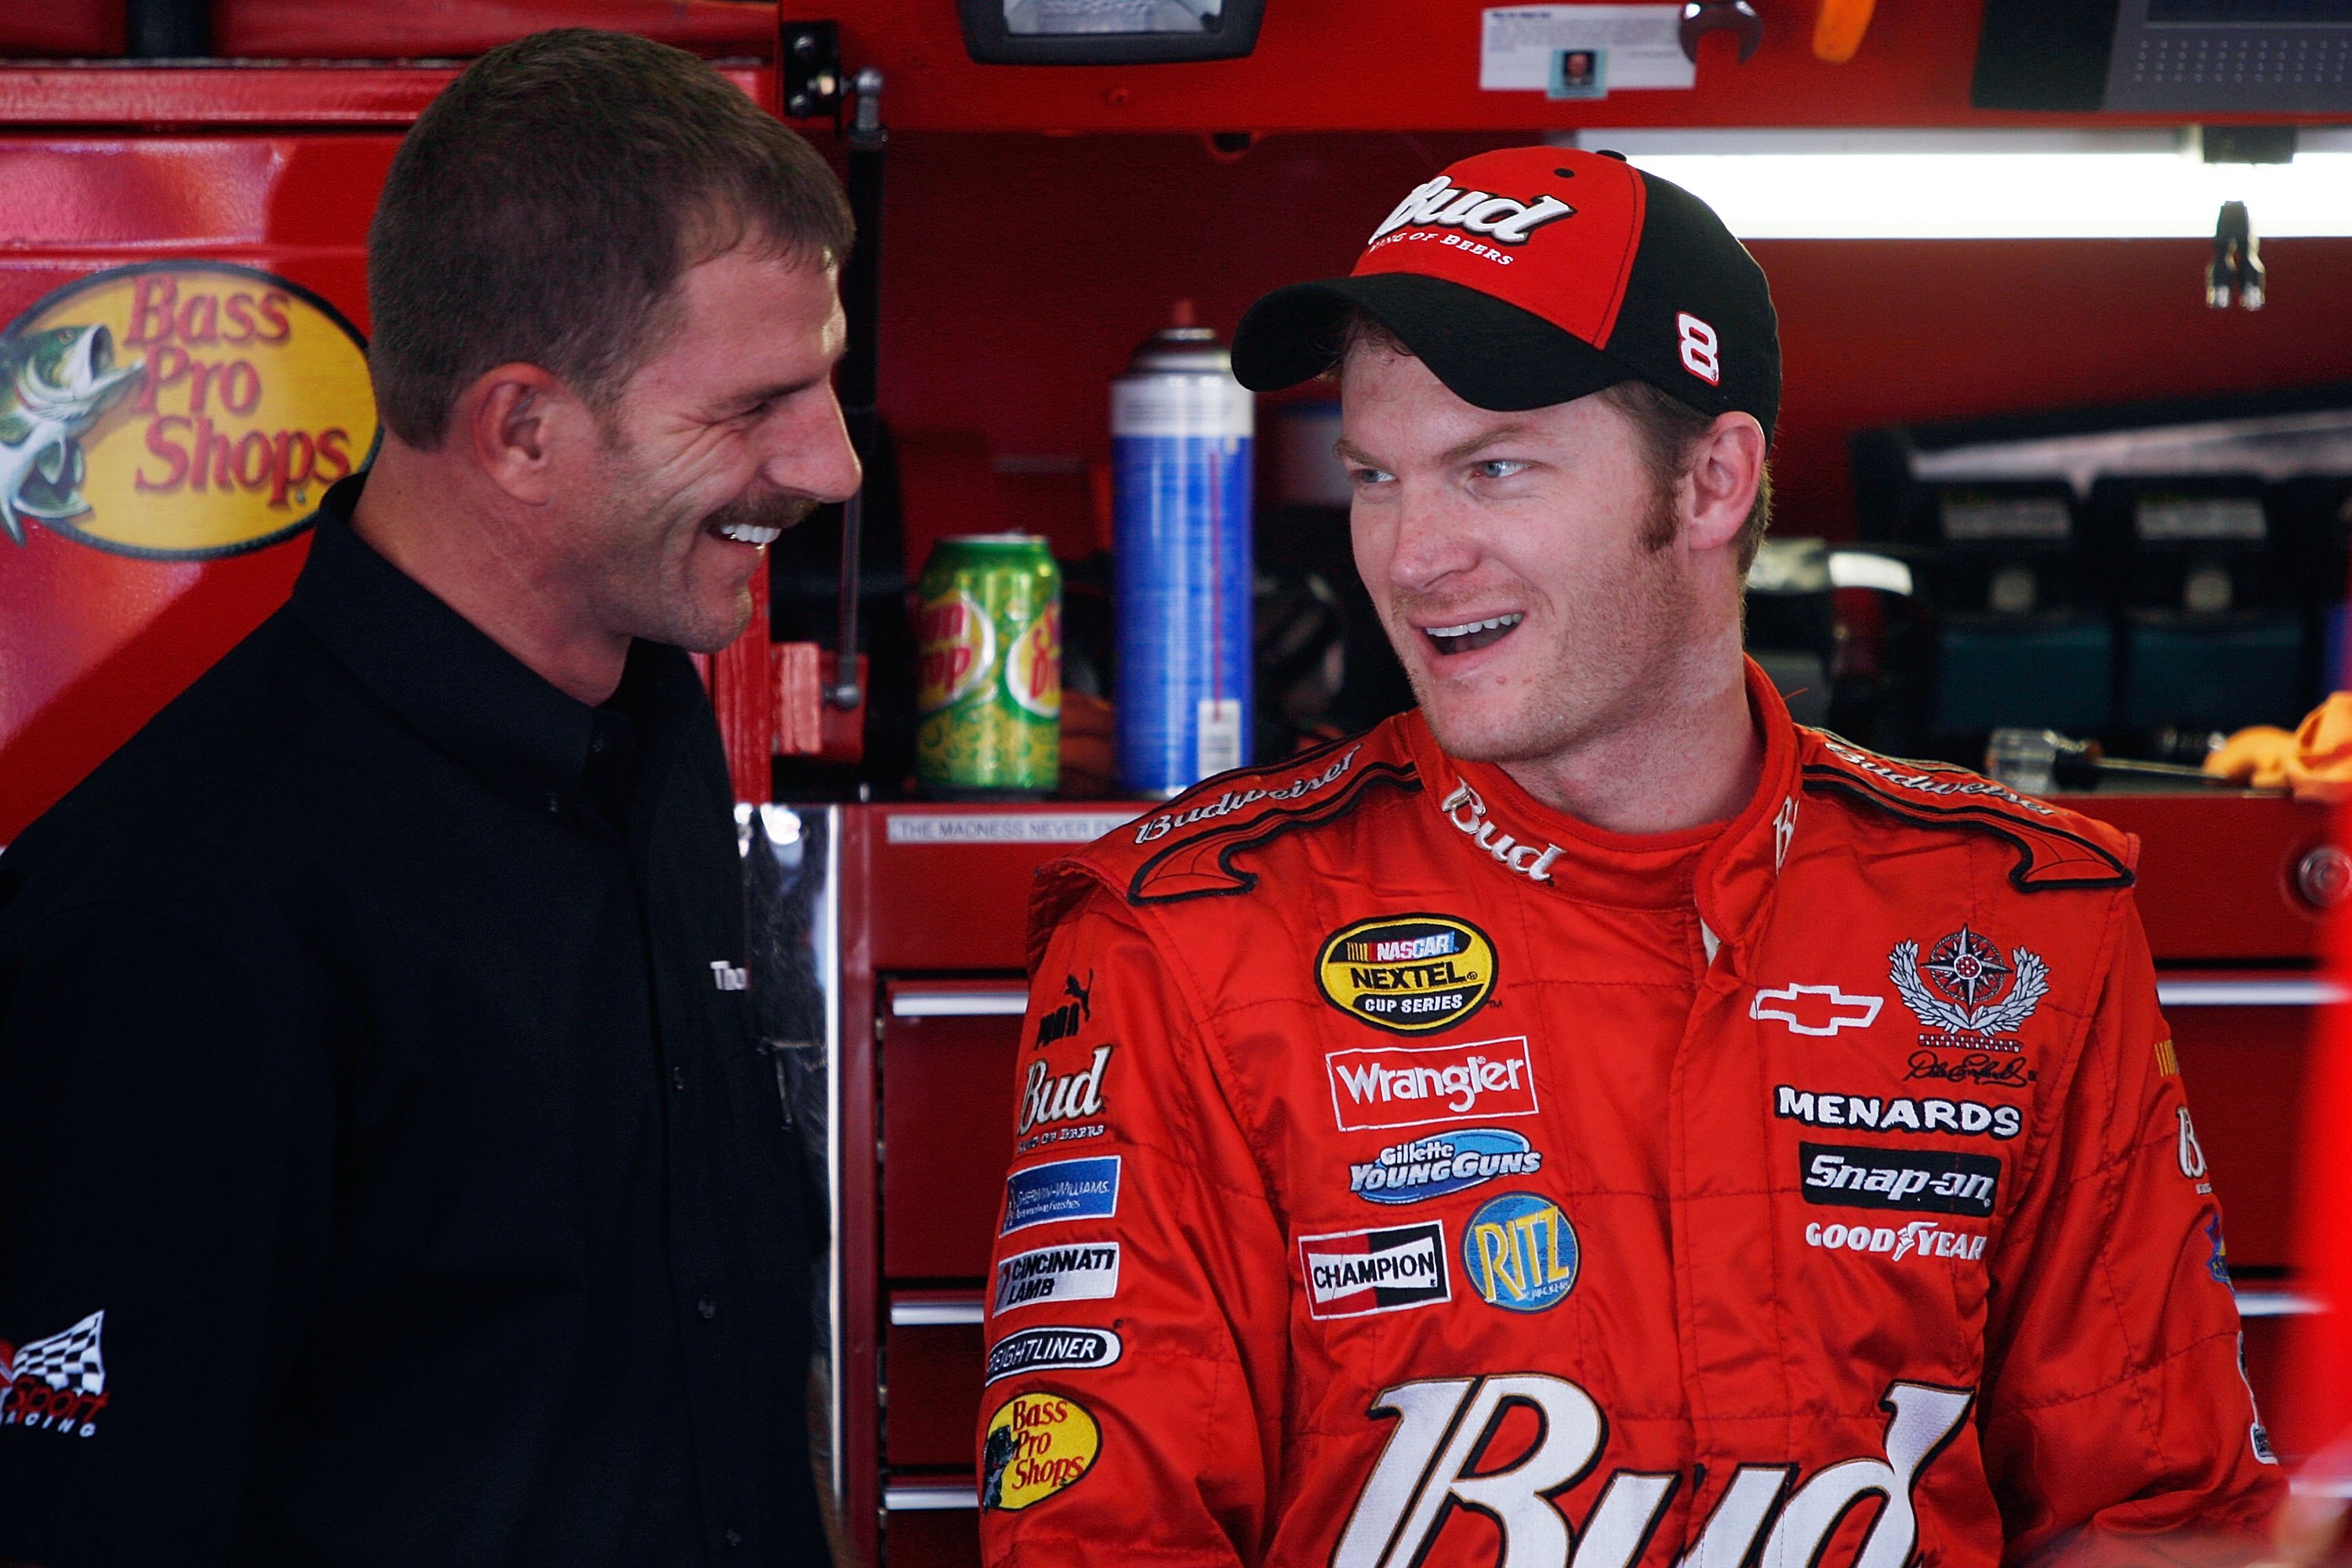 Dale Earnhardt Jr. was very excited to meet his brother for the first time.